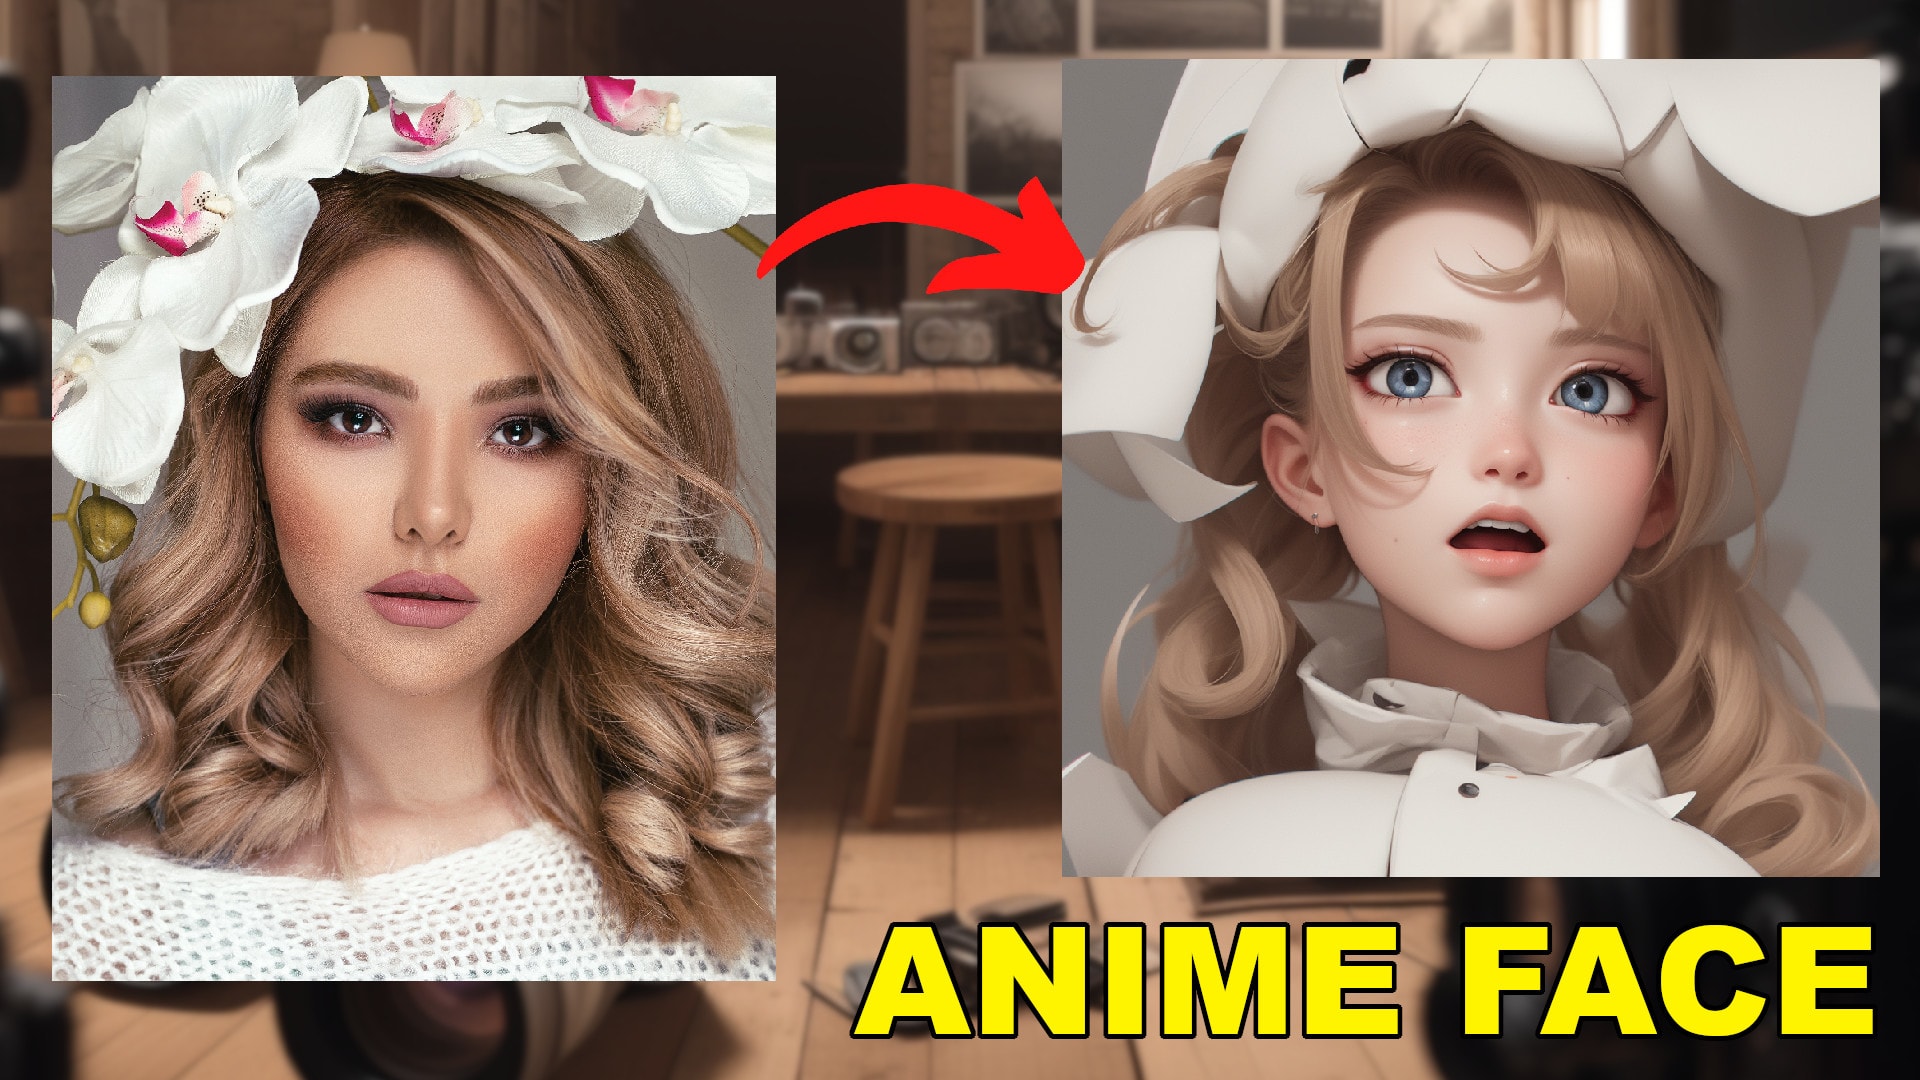 Discover 134+ turning pictures into anime super hot - awesomeenglish.edu.vn